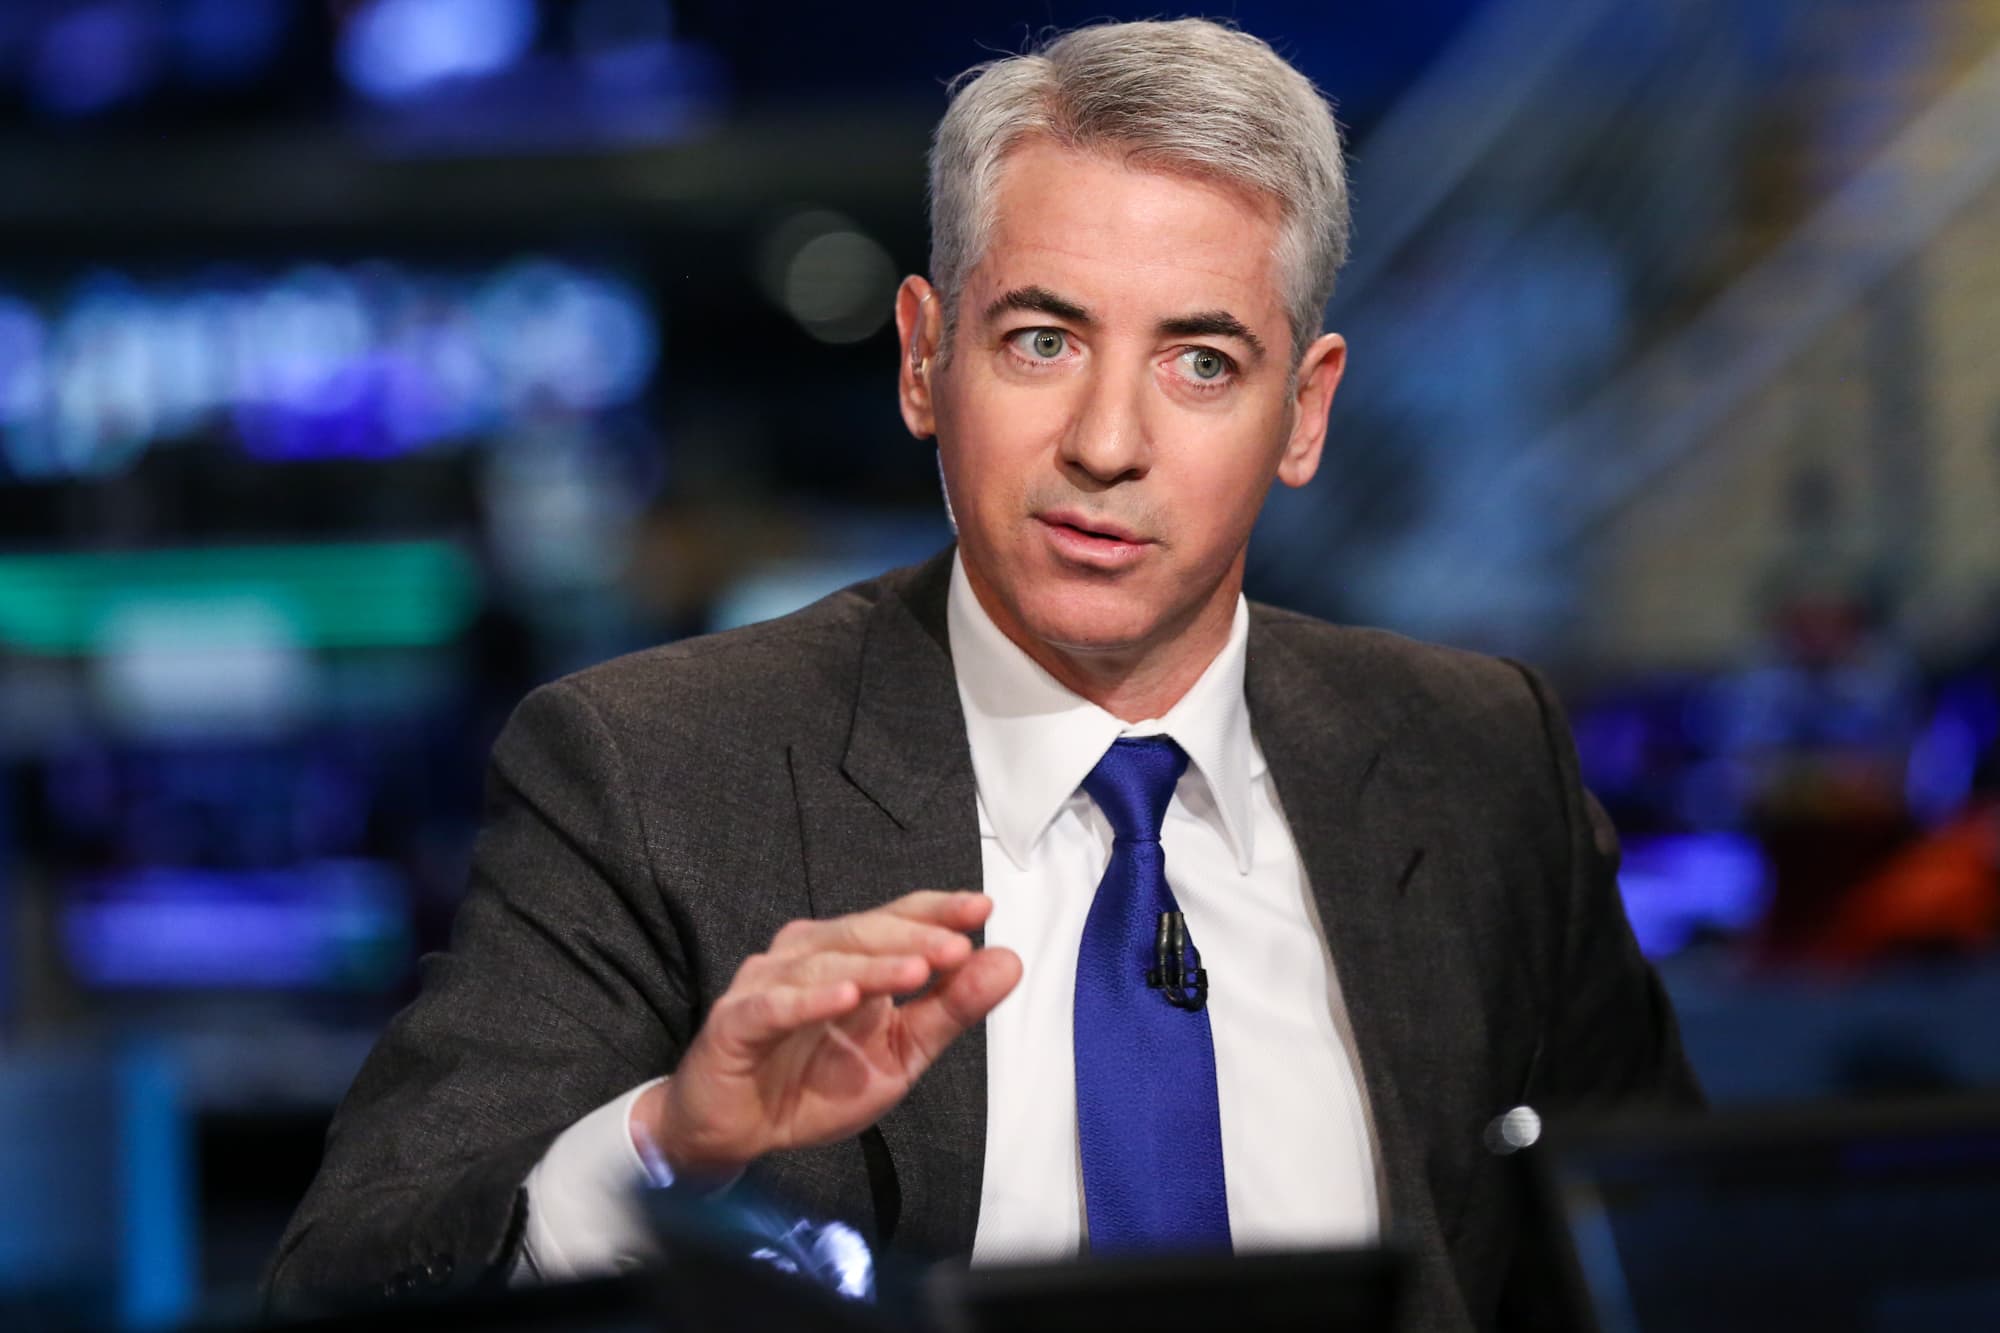 CEO and Founder of Pershing Square Bill Ackman interests in crypto (Source: CNBC) ​